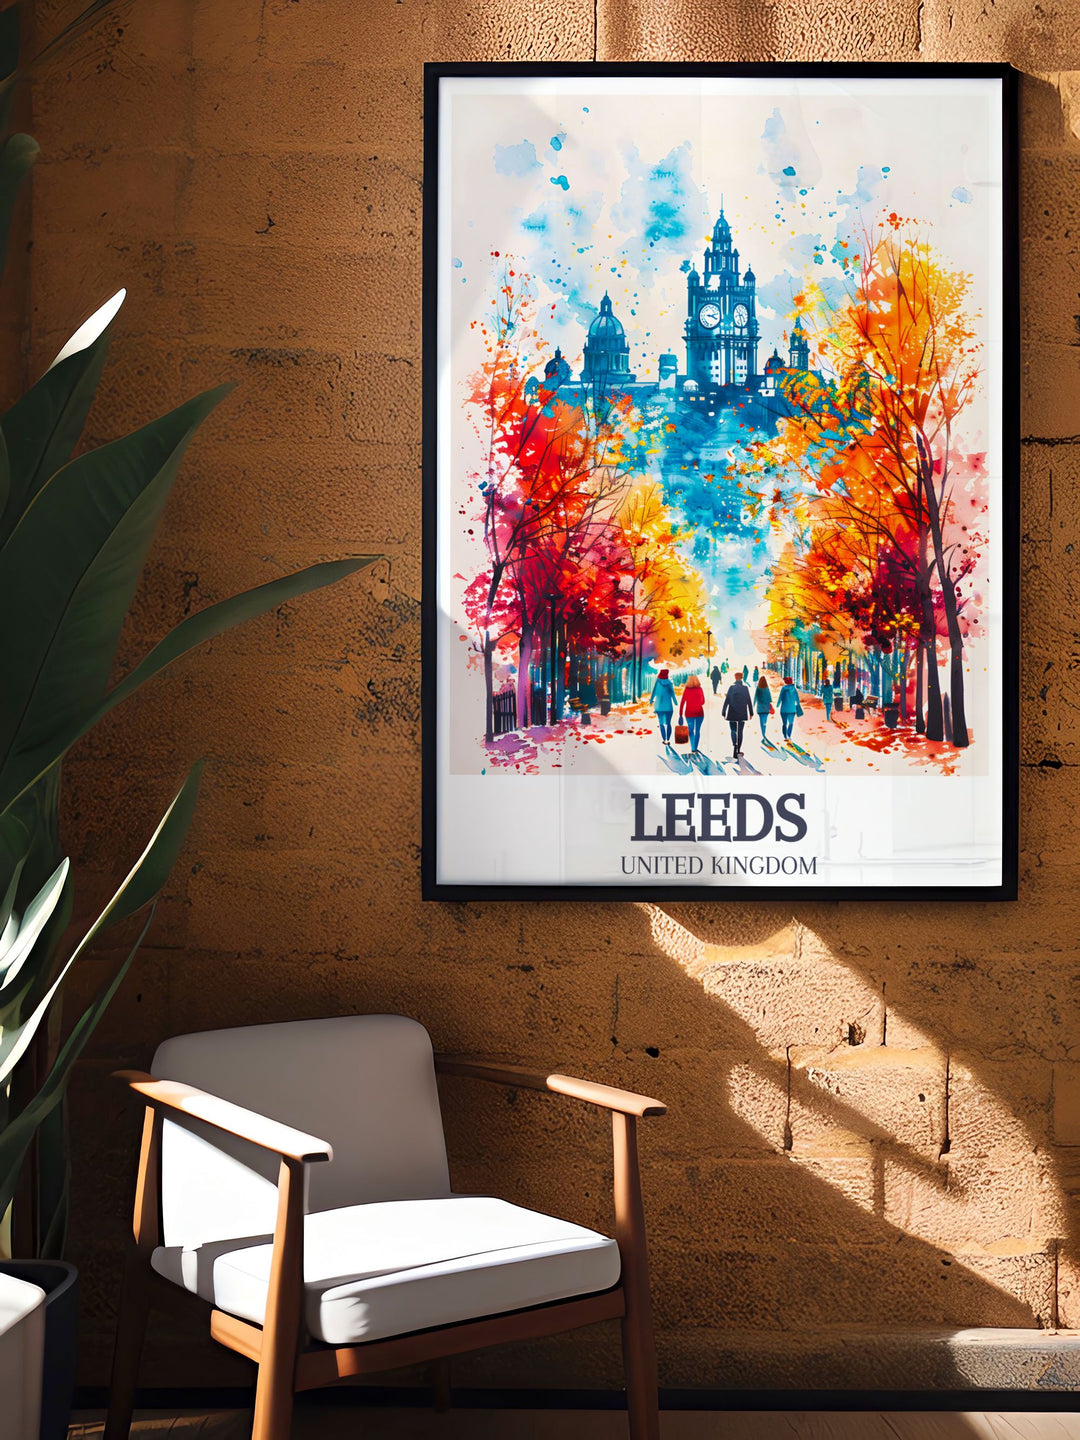 Leeds townhall and Leeds townhall clock wall decor that brings the historic charm of Leeds into your home. Perfect for those who appreciate England art and want to celebrate the beauty of Leeds with this exquisite travel poster.